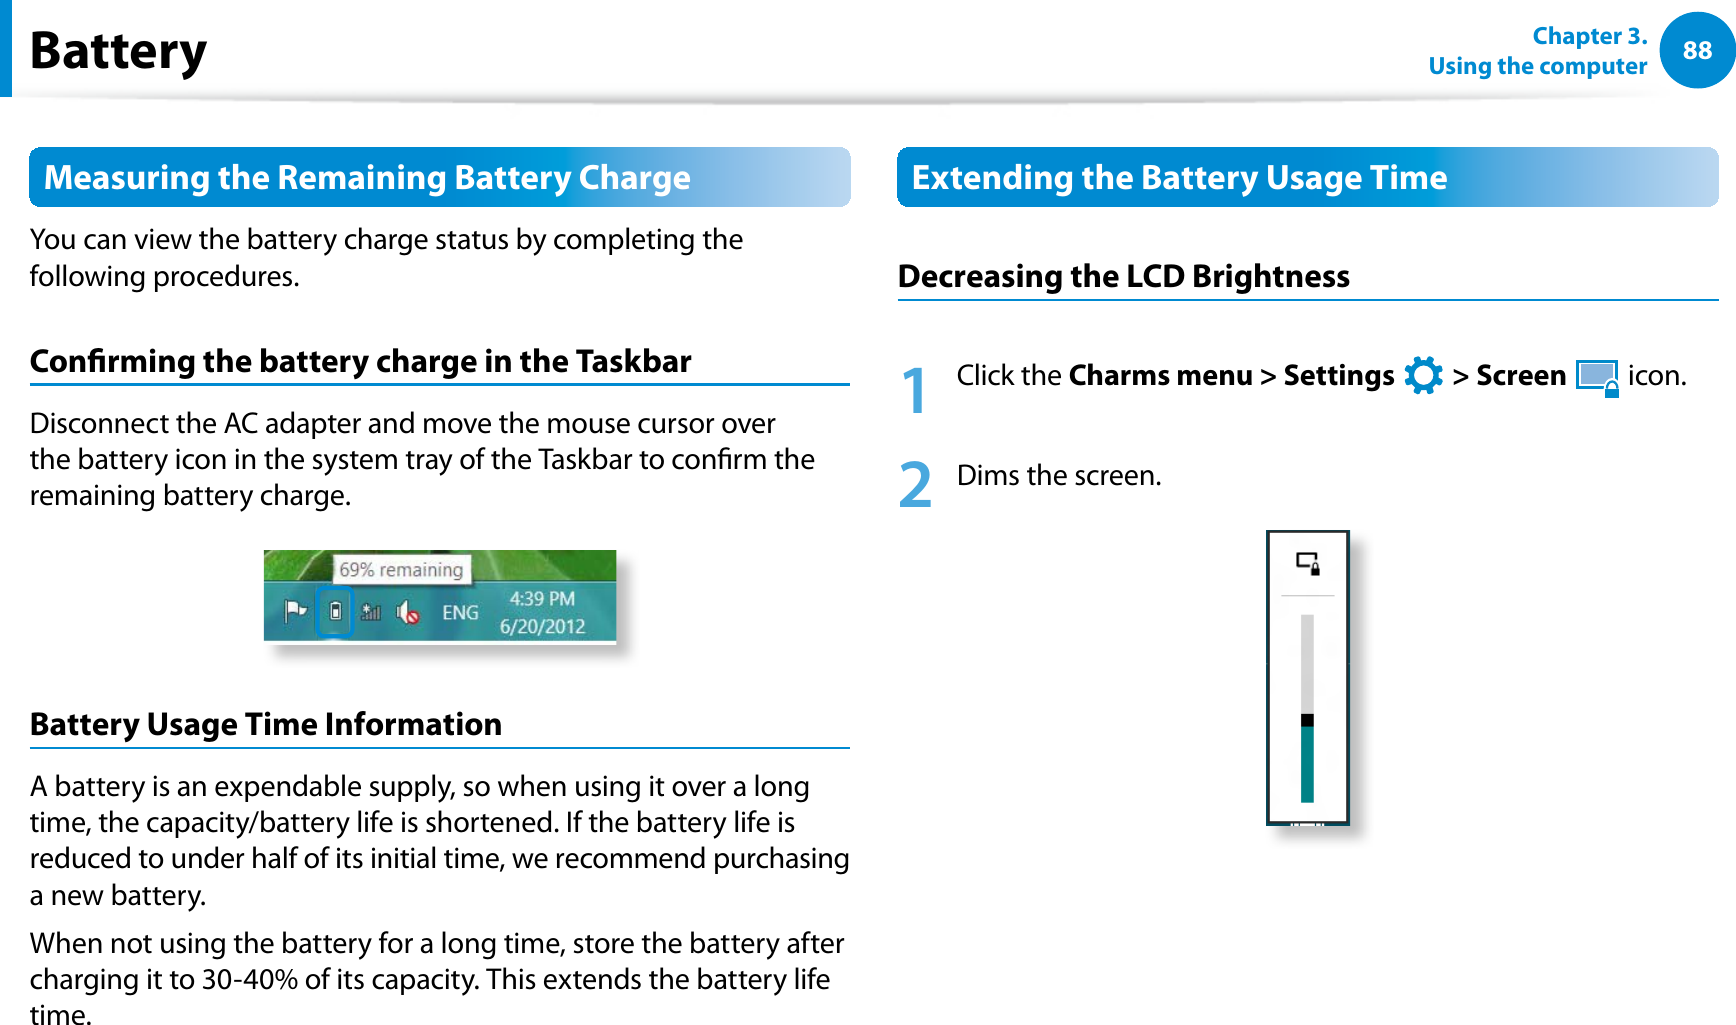 88Chapter 3.  Using the computerBatteryMeasuring the Remaining Battery ChargeYou can view the battery charge status by completing the following procedures.Conrming the battery charge in the TaskbarDisconnect the AC adapter and move the mouse cursor over the battery icon in the system tray of the Taskbar to conrm the remaining battery charge.Battery Usage Time InformationA battery is an expendable supply, so when using it over a long time, the capacity/battery life is shortened. If the battery life is reduced to under half of its initial time, we recommend purchasing a new battery.When not using the battery for a long time, store the battery after charging it to 30-40% of its capacity. This extends the battery life time.Extending the Battery Usage TimeDecreasing the LCD Brightness1 Click the Charms menu &gt; Settings   &gt; Screen  icon.2  Dims the screen.